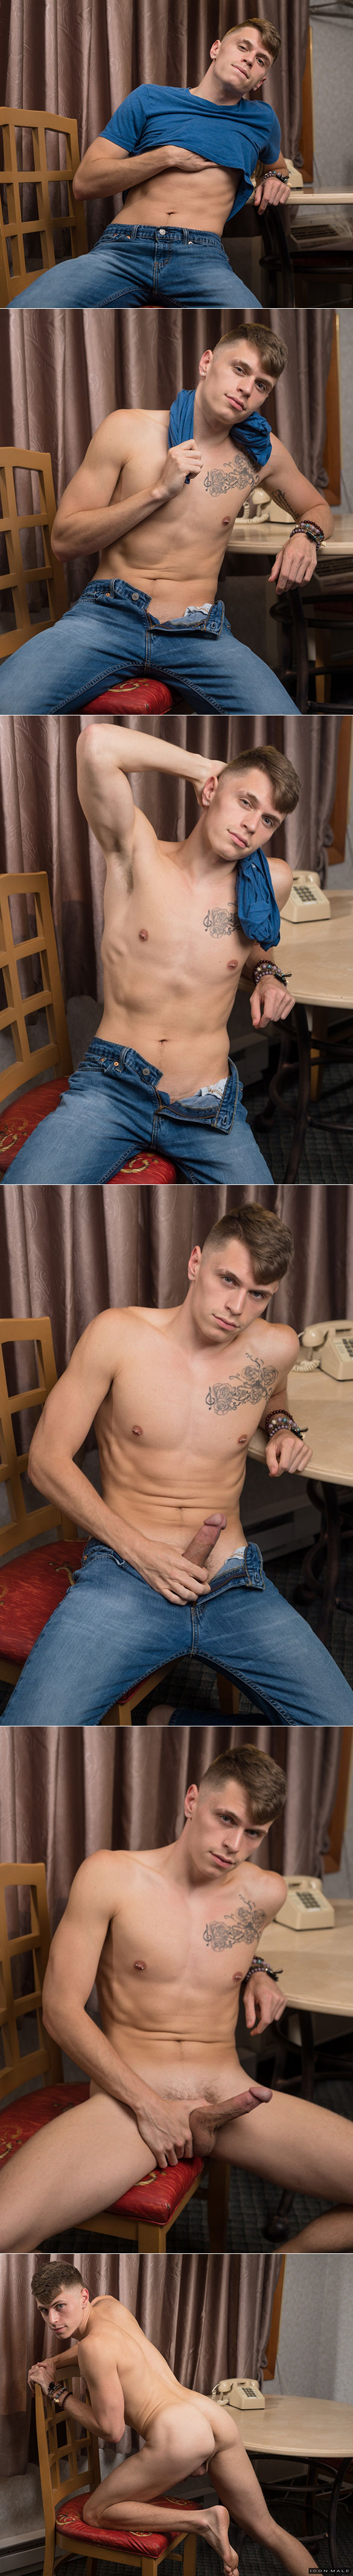 IconMale: Troy Accola rides Noah Donovan's massive cock in "His Sister's Lover"